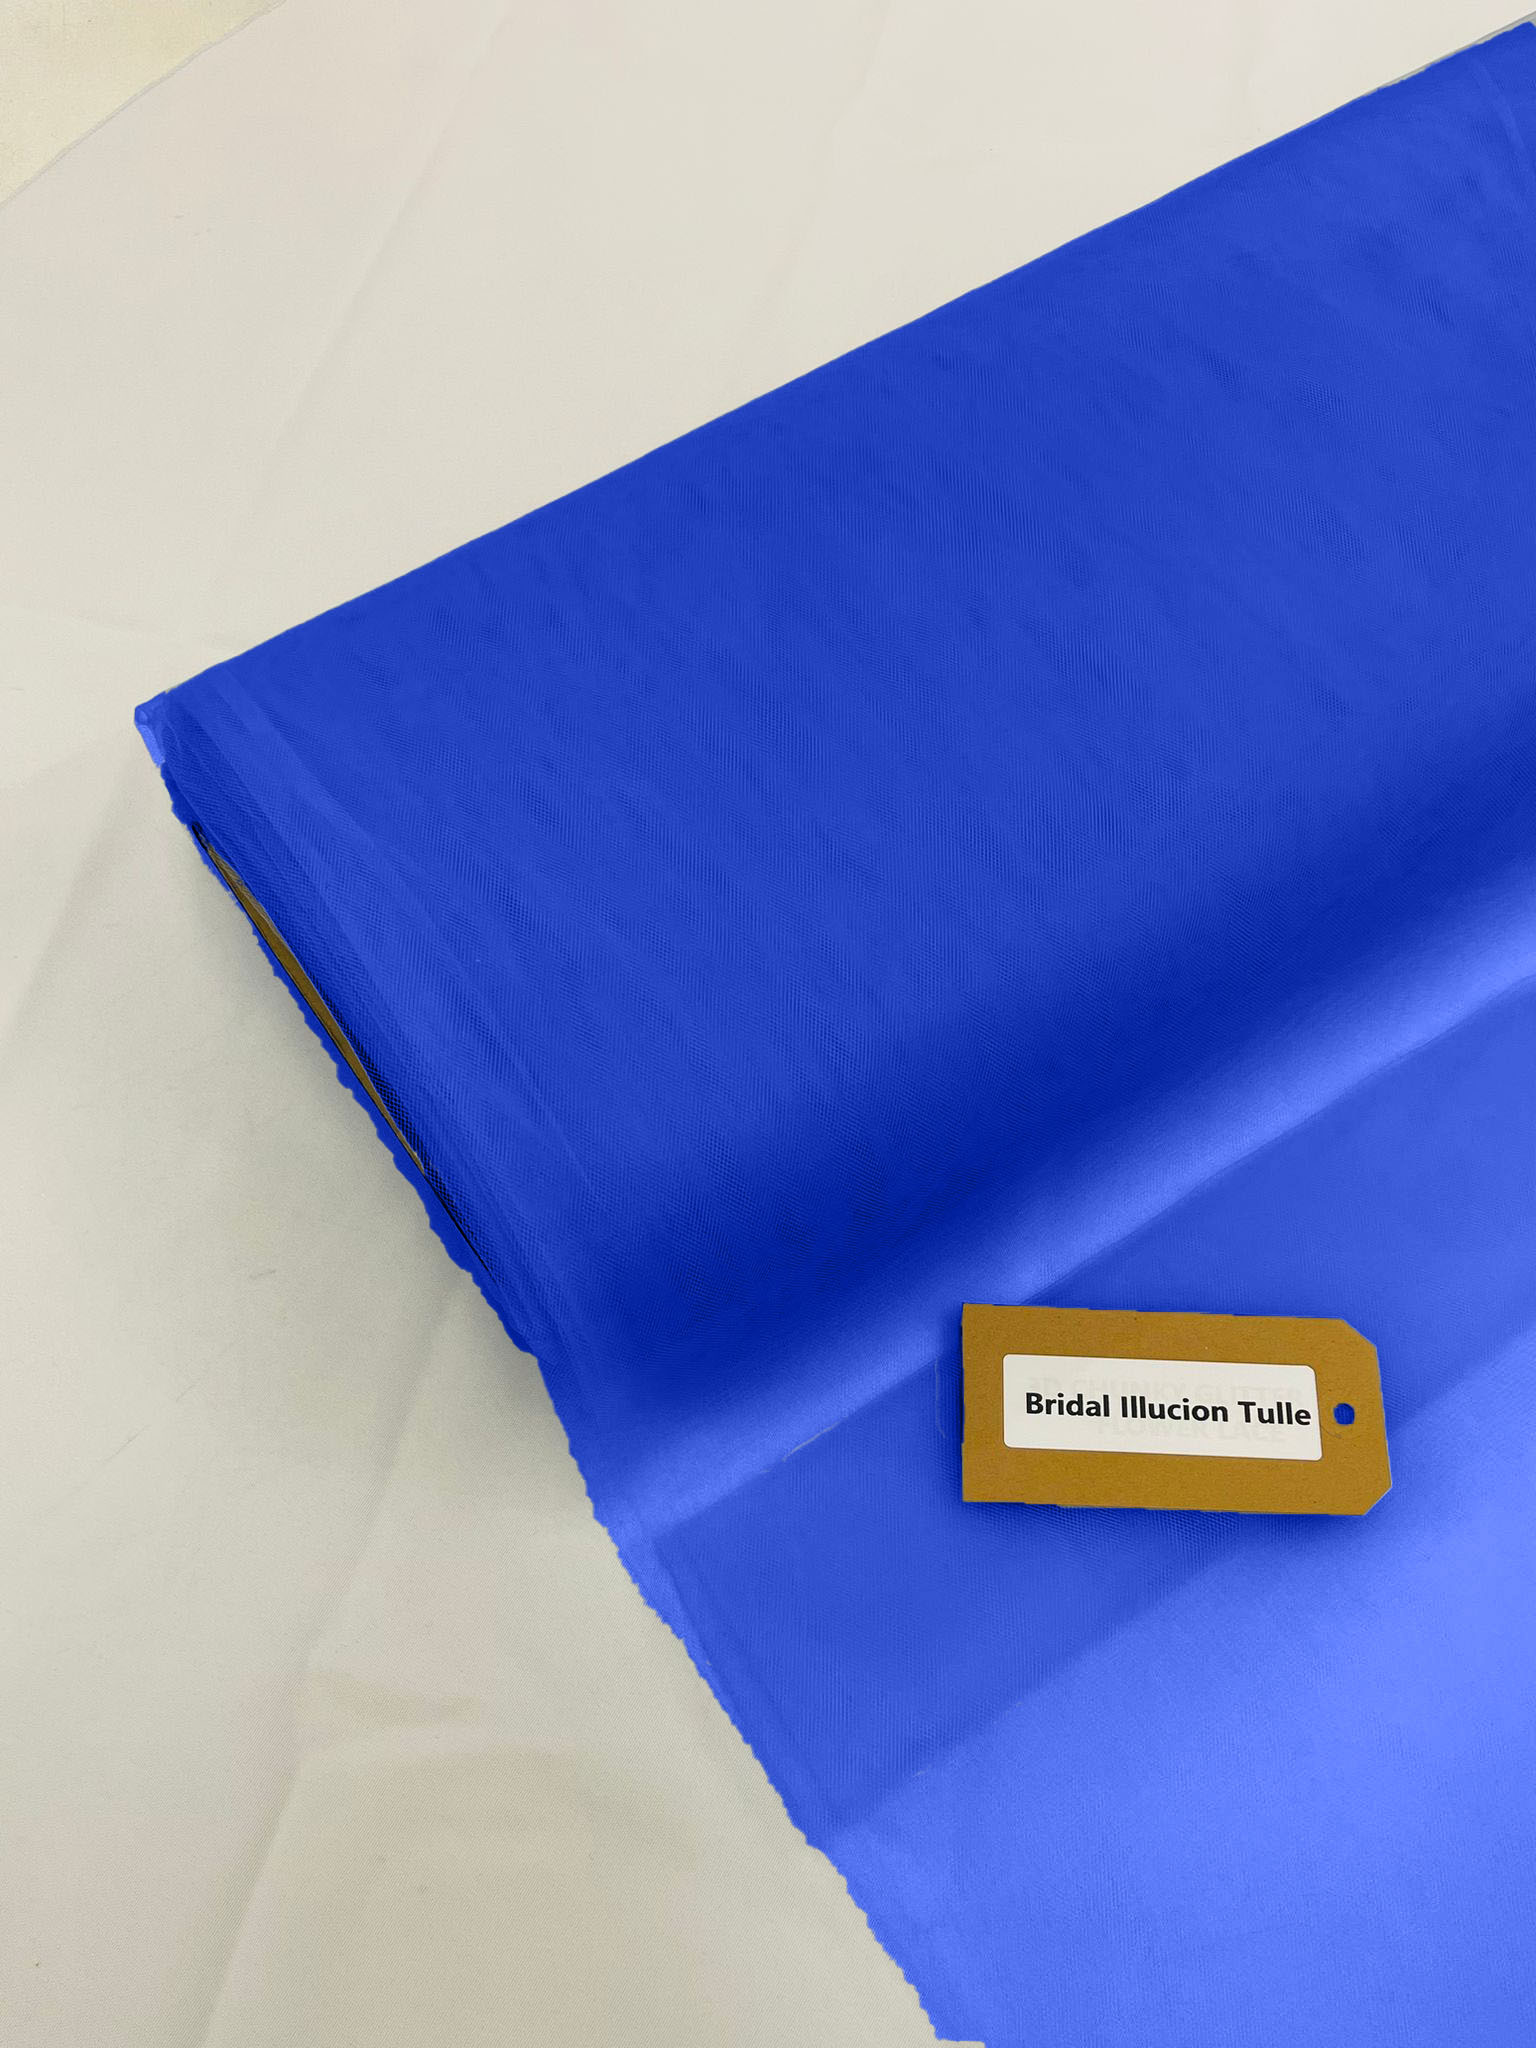 Royal Blue - Bridal Illusion Tulle 108"Wide Polyester Premium Tulle Fabric Bolt, By The Roll.